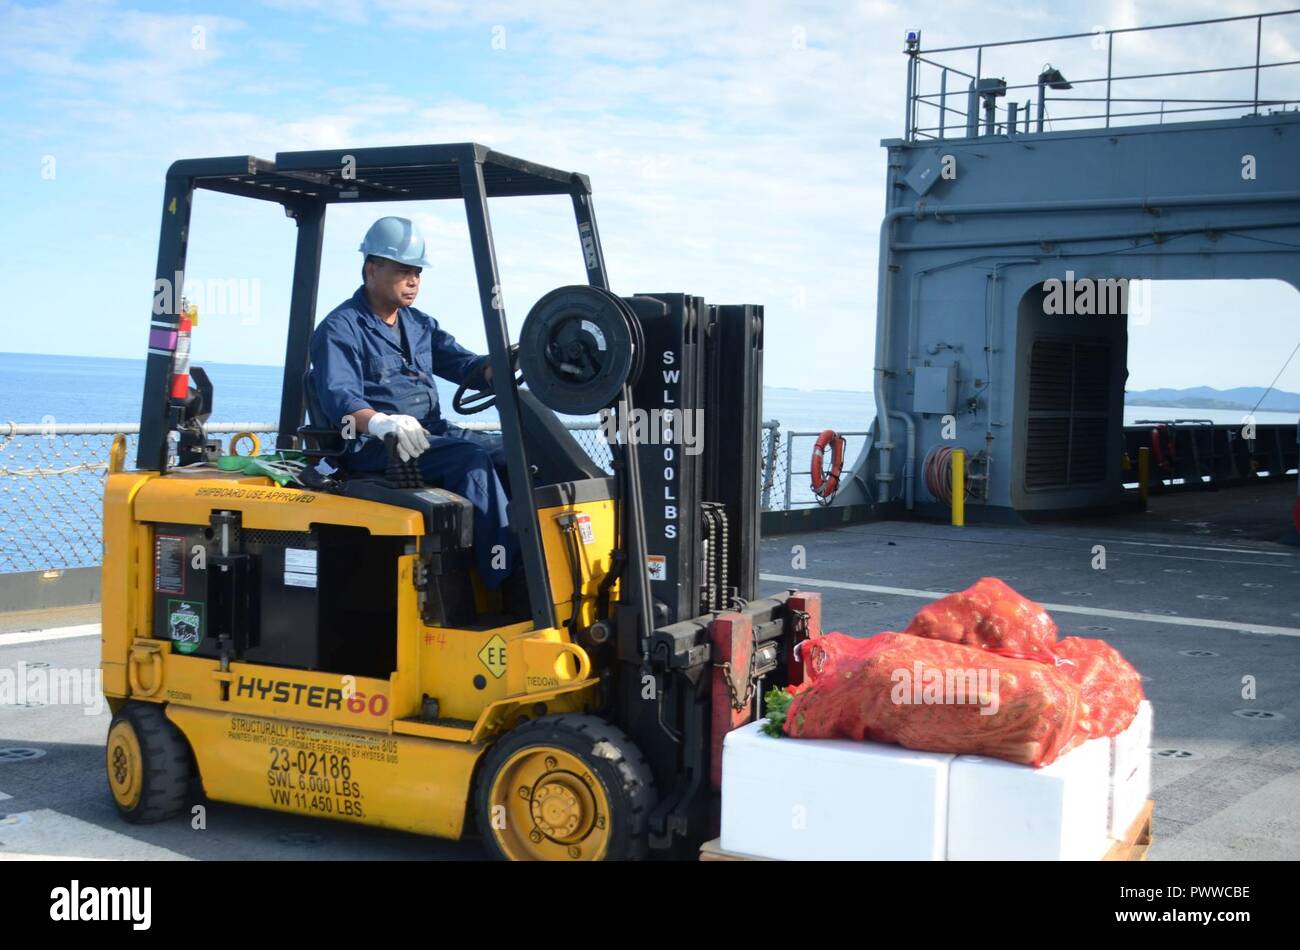 NOUMEA, New Caledonia (July 06, 2017) Nito Catunao, Boatswains Mate onboard USNS Sacagawea (T-AKE 2), operates a forklift during stores onload off shore Noumea, New Caledonia in support of Koa Moana 17, July 6. Koa Moana 17 is designed to improve theater security, and conduct law enforcement and infantry training in the Pacific region in order to enhance interoperability with partner nations. ( Stock Photo